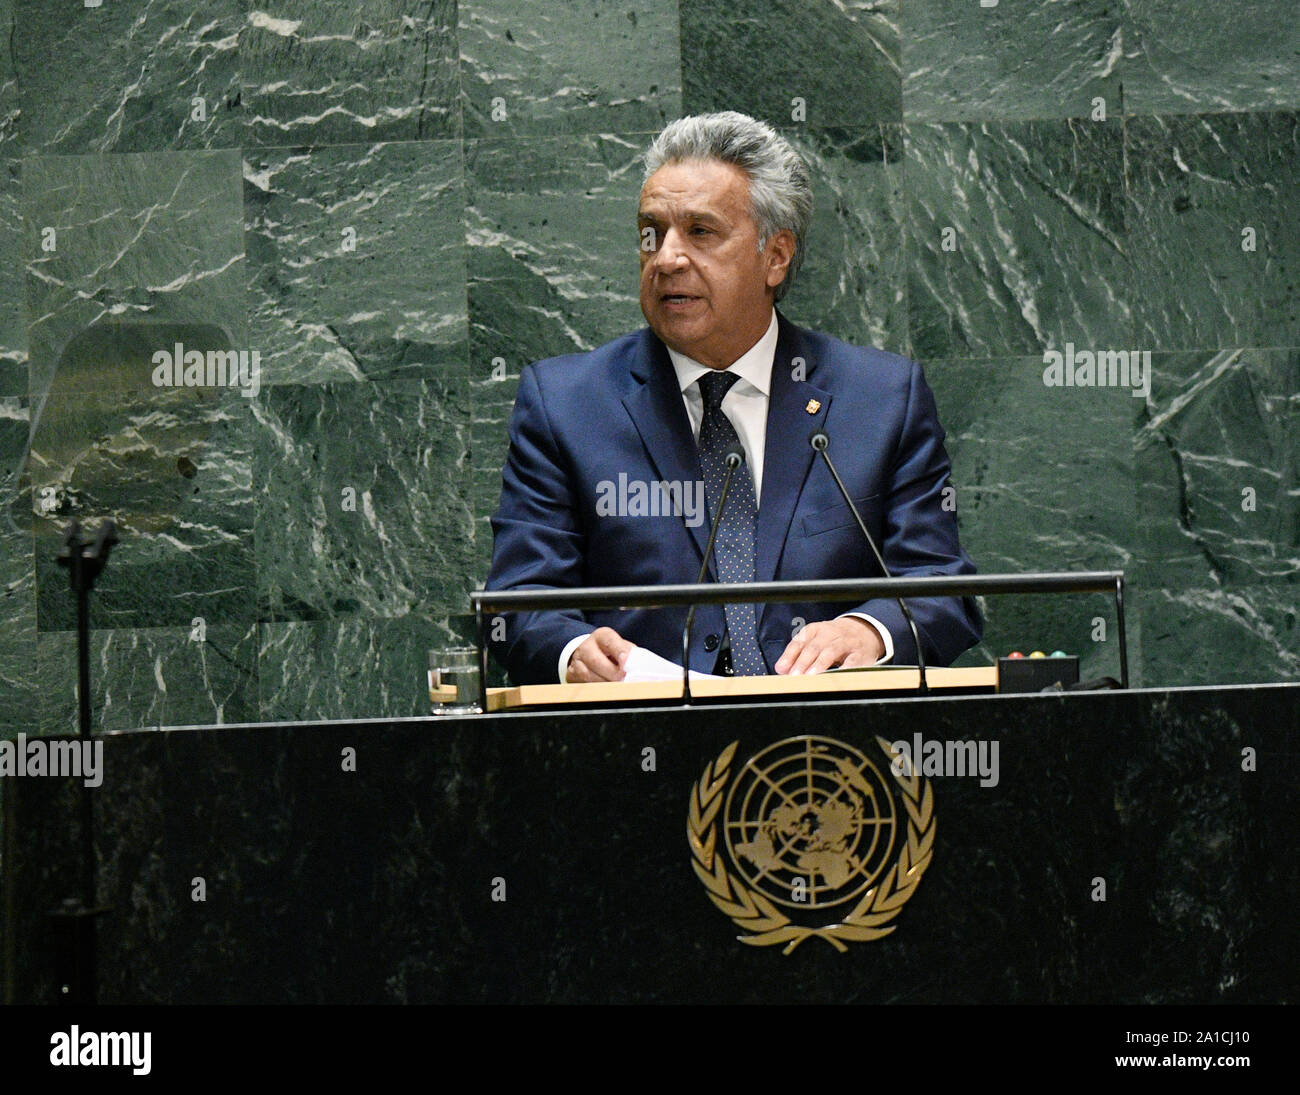 United Nations. 25th Sep, 2019. Ecuador's President Lenin Moreno Garces addresses the General Debate of the 74th session of the UN General Assembly at the UN headquarters in New York, on Sept. 25, 2019. Credit: Liu Jie/Xinhua/Alamy Live News Stock Photo